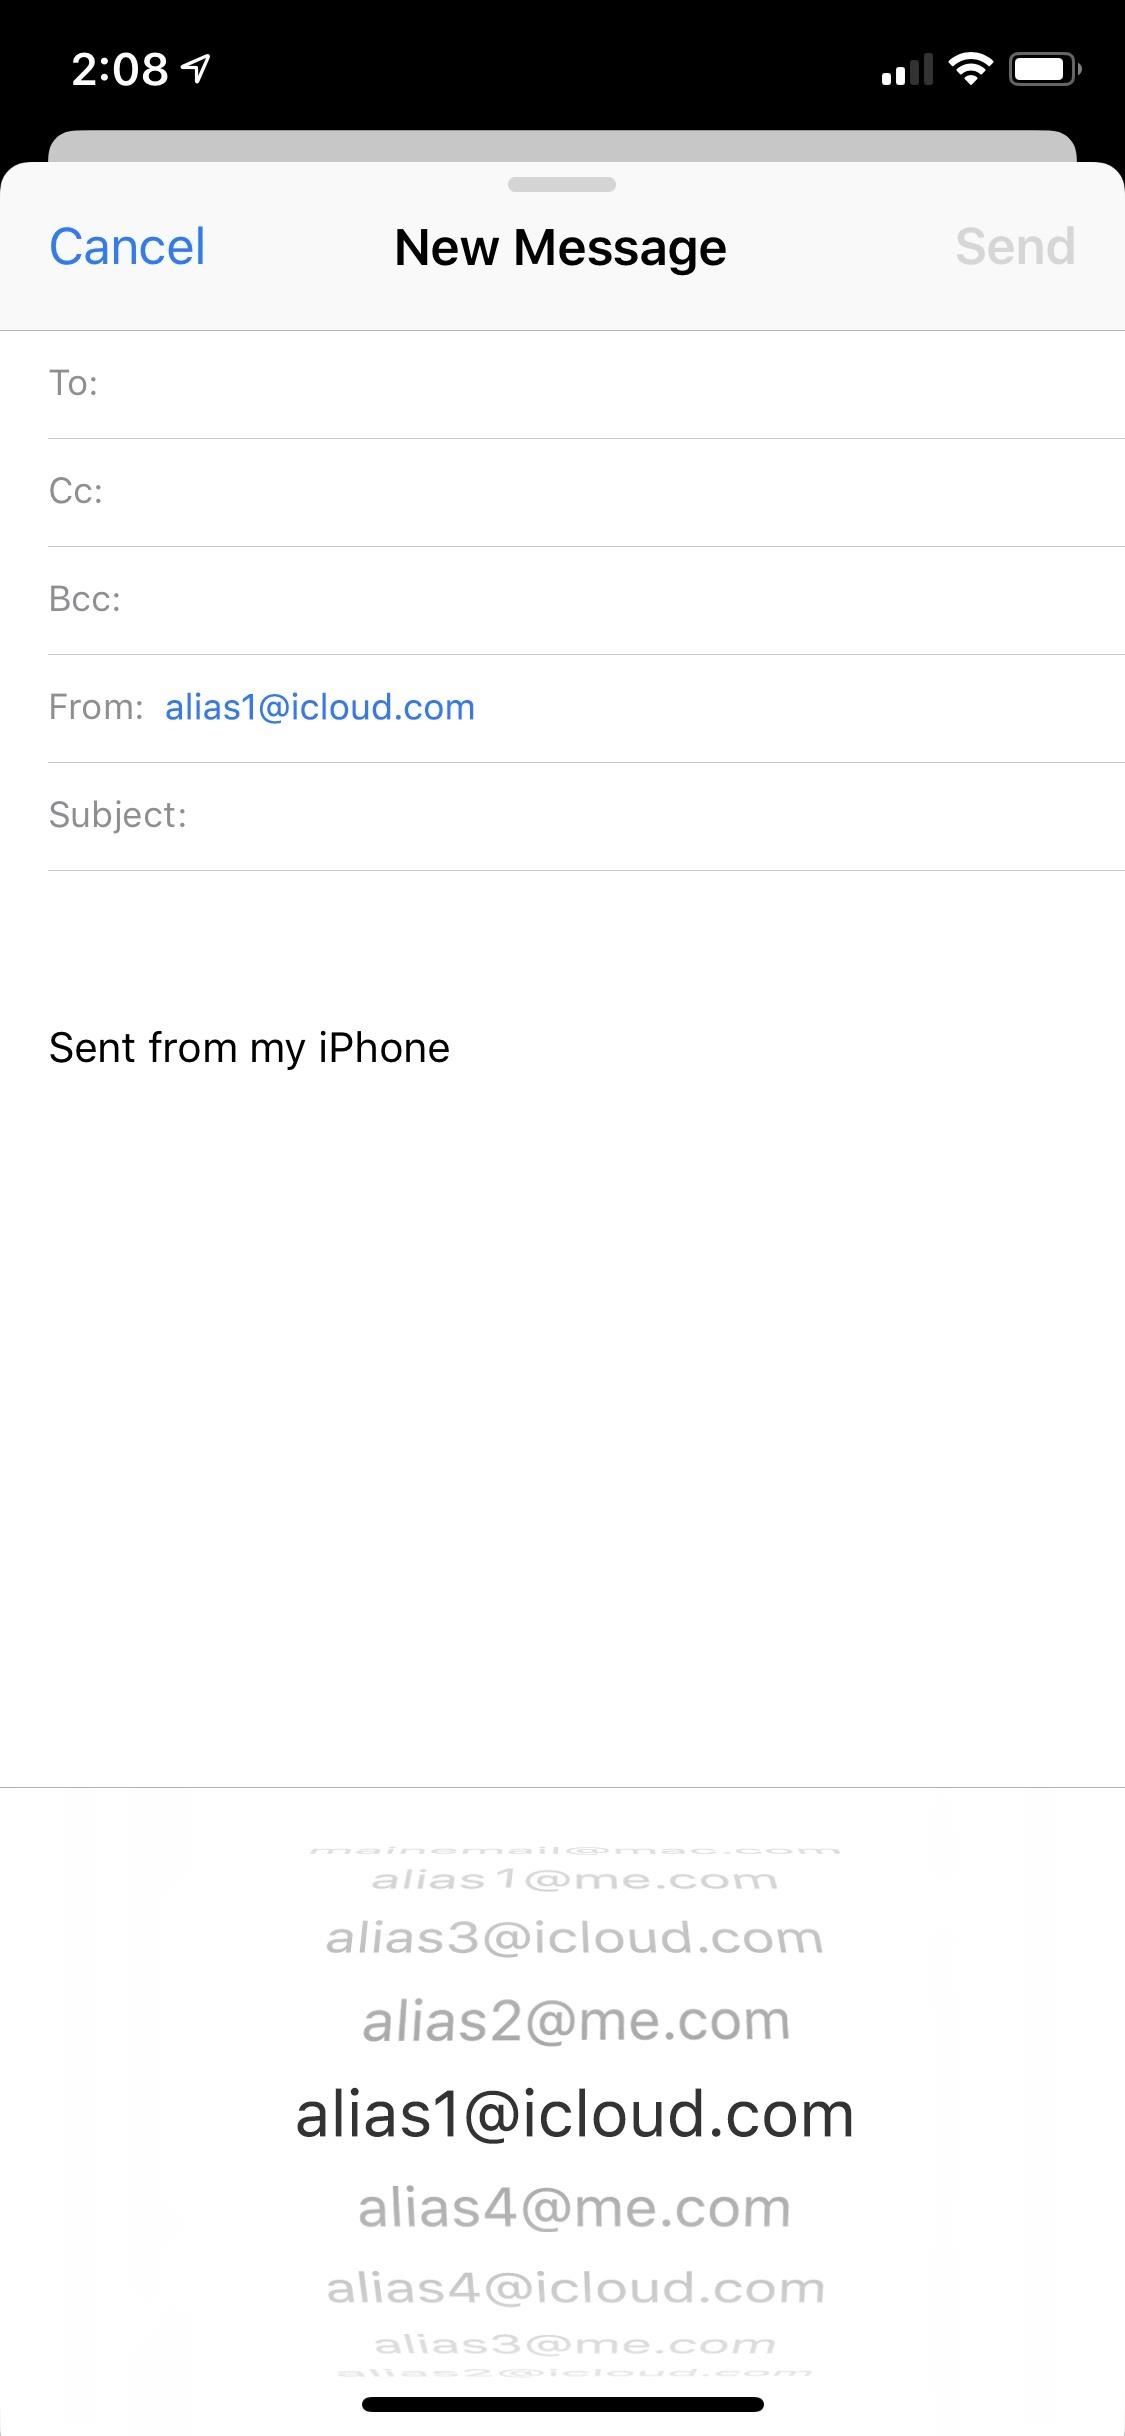 How to Hide @iCloud, @Me & Custom Aliases from Your Mail App's 'From' Field on Your iPhone